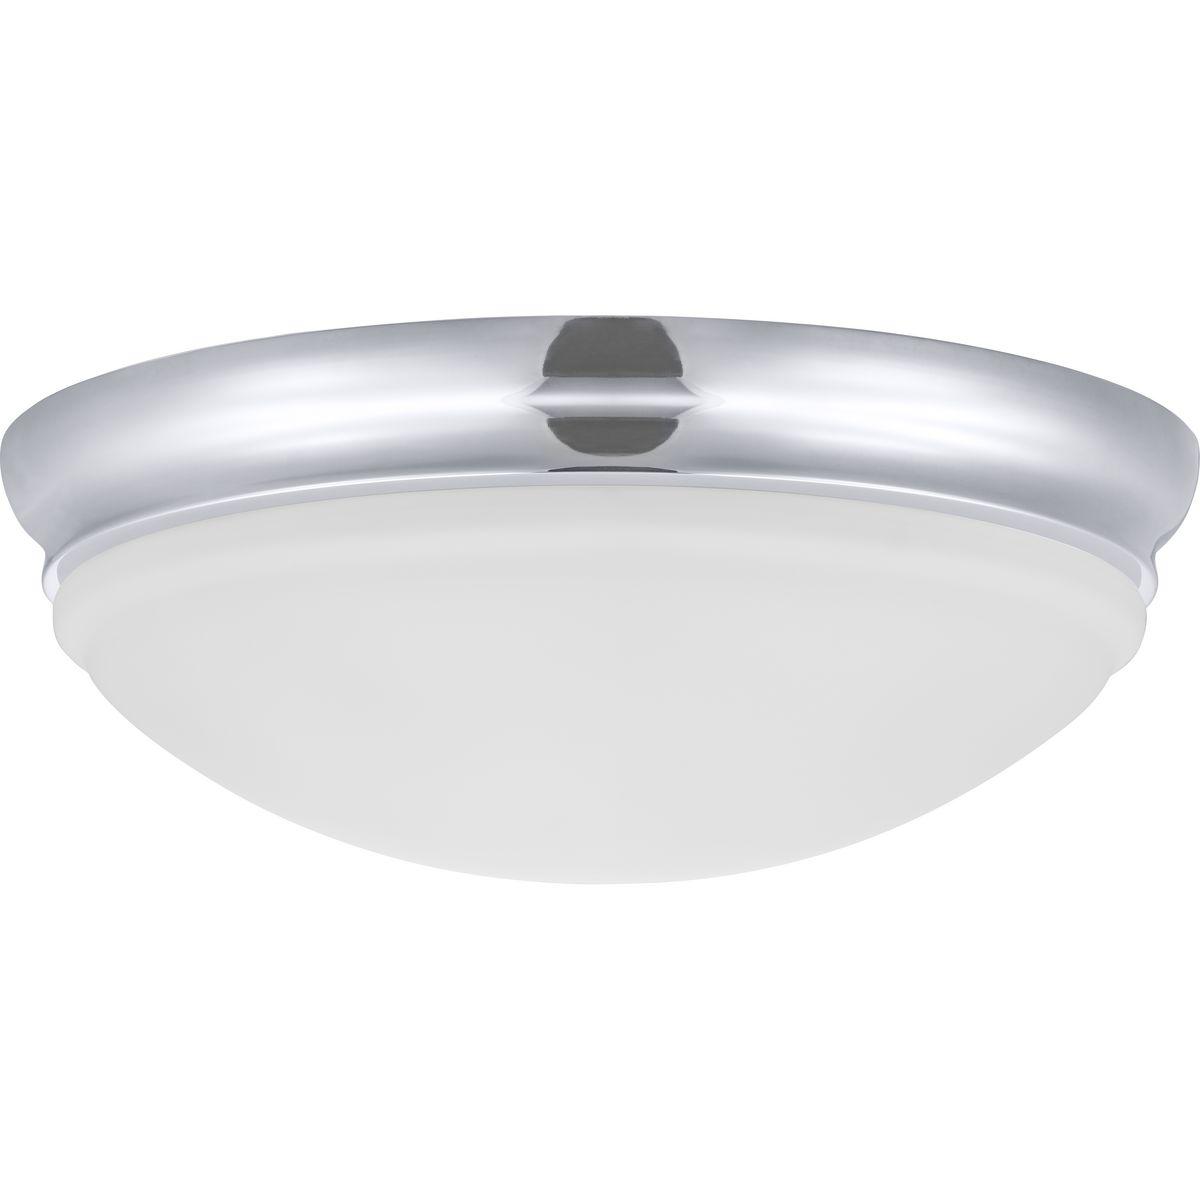 Hubbell P350131-015-30 LED 15in. flush mount with white acrylic diffuser mounts to a Polished Chrome ceiling pan. Ideal for ceiling or wall mount applications and suitable to add ambient illumination for Modern or Traditional interior spaces.  ; The classic ceiling fixture: A p